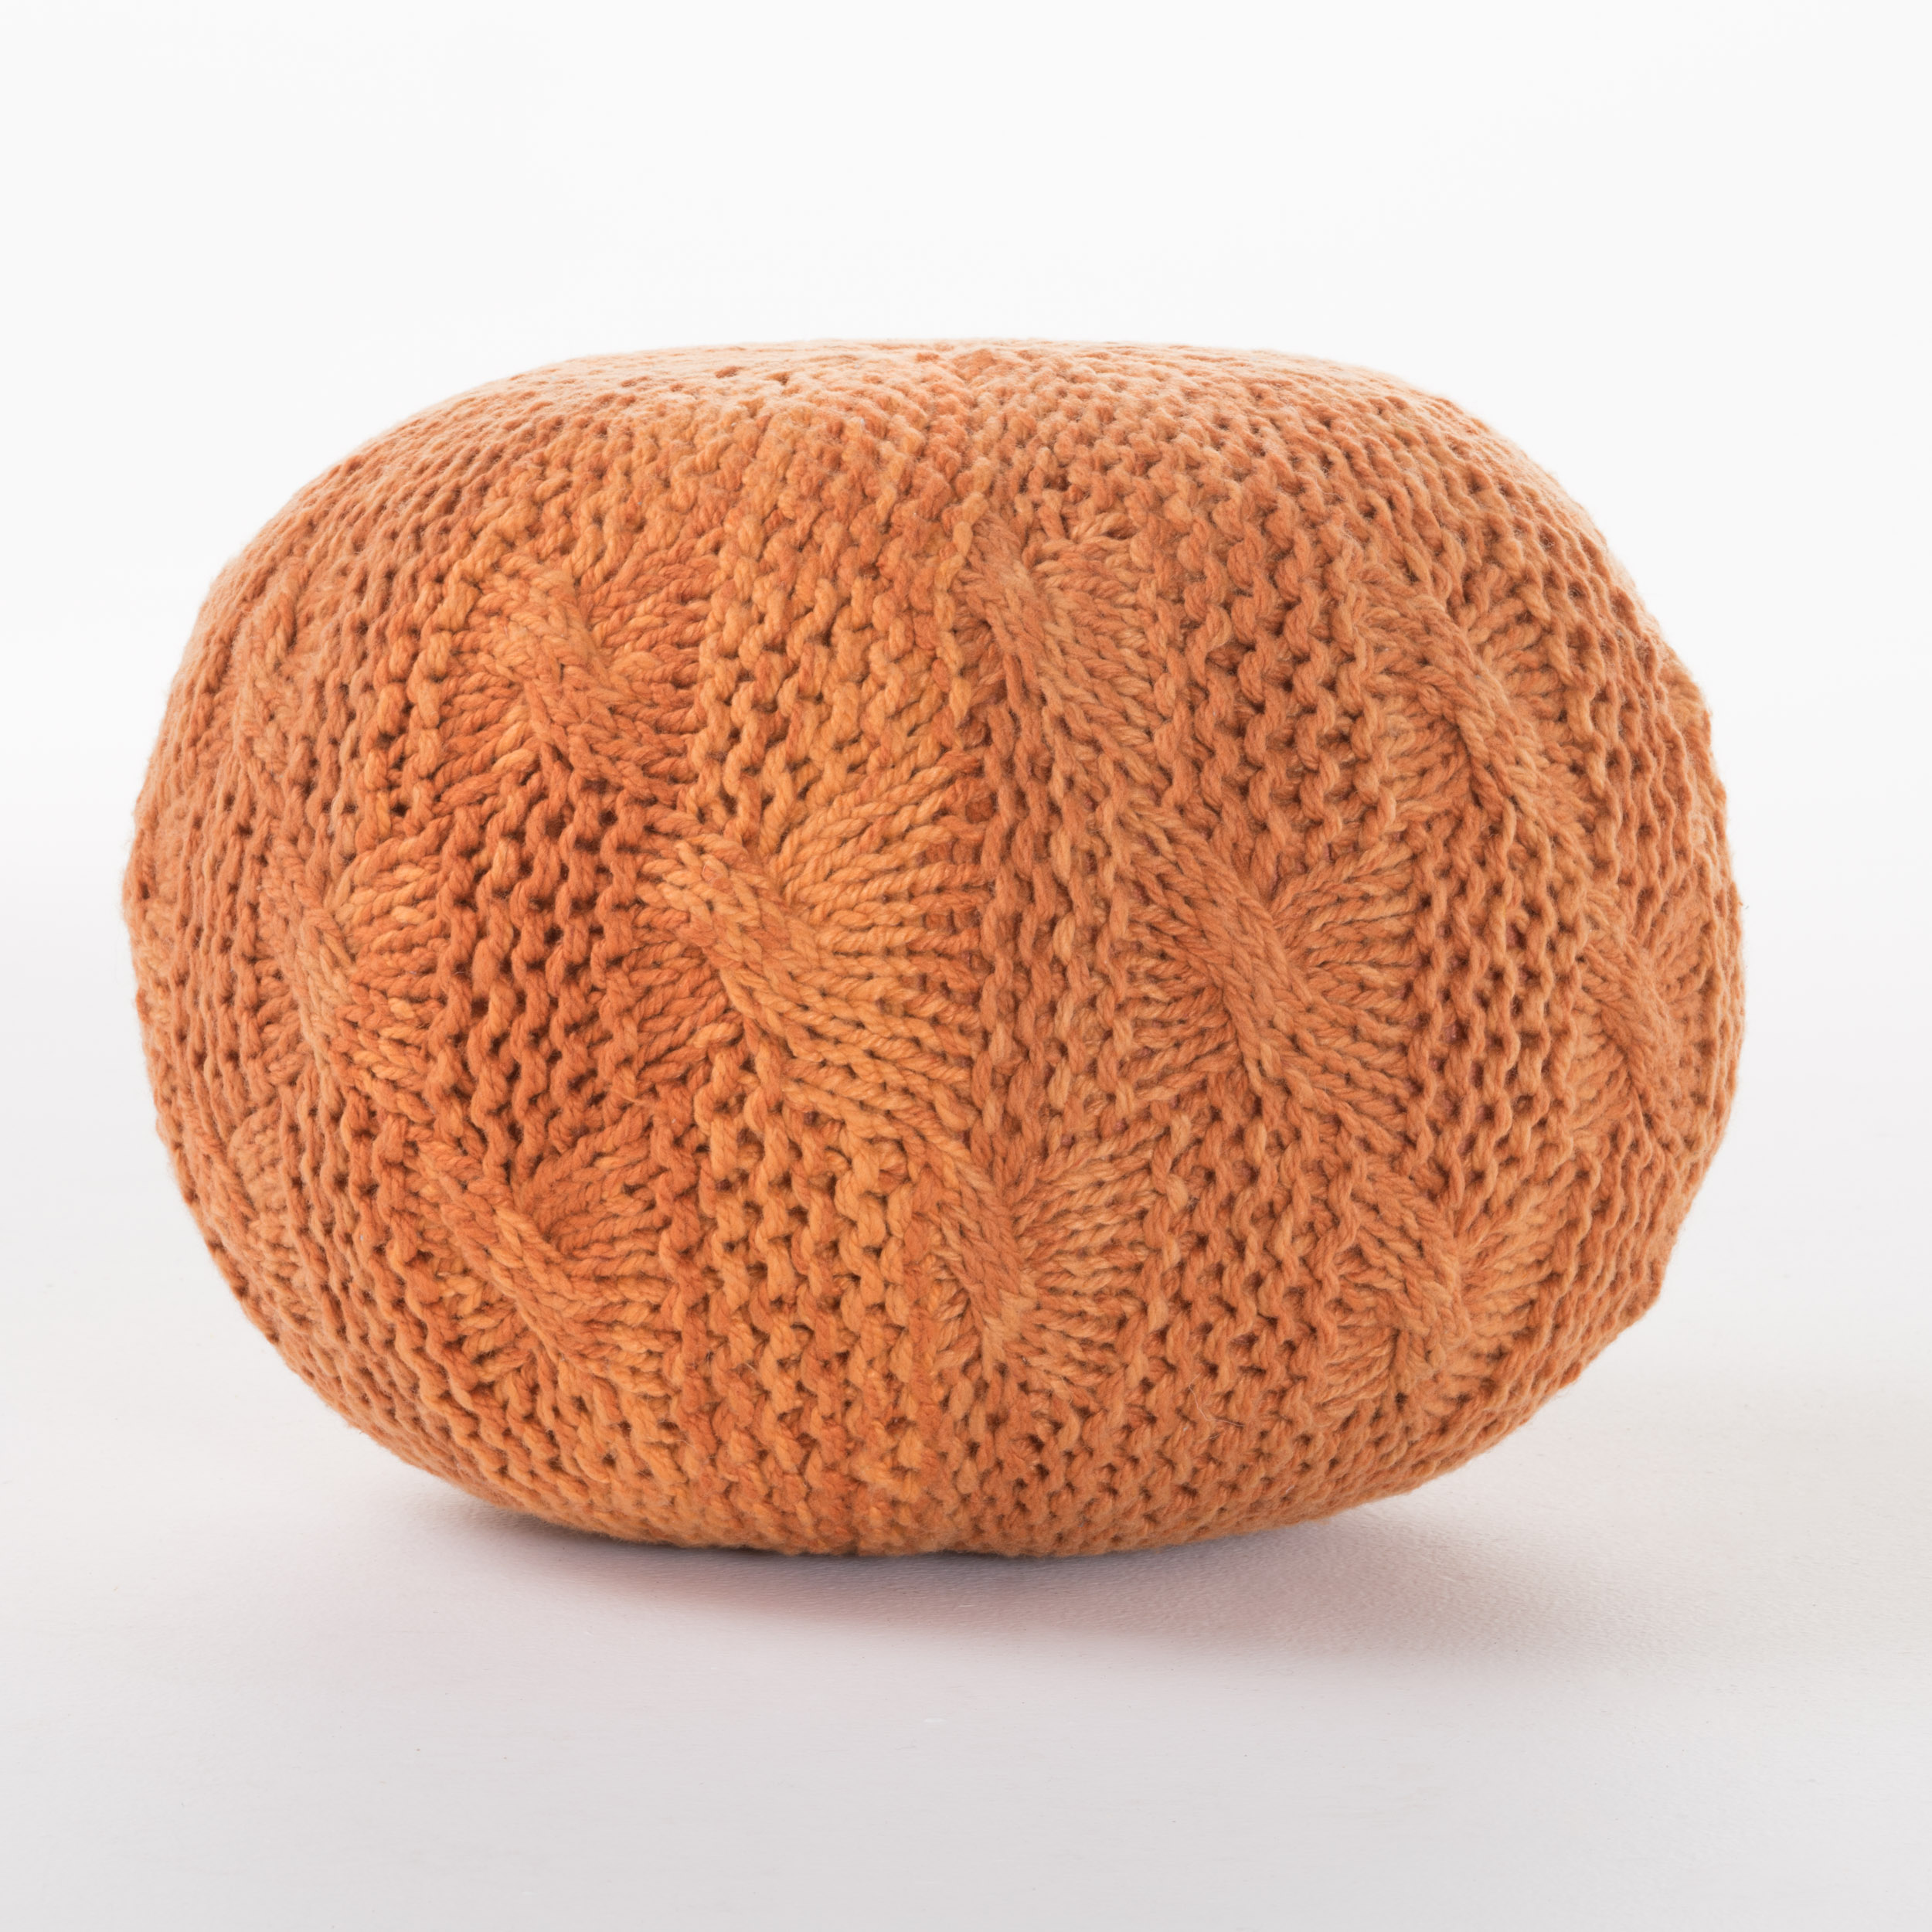 Noble House Zyaire Indoor Outdoor Hand Knitted Weave Fabric Pouf, Orange - image 4 of 4